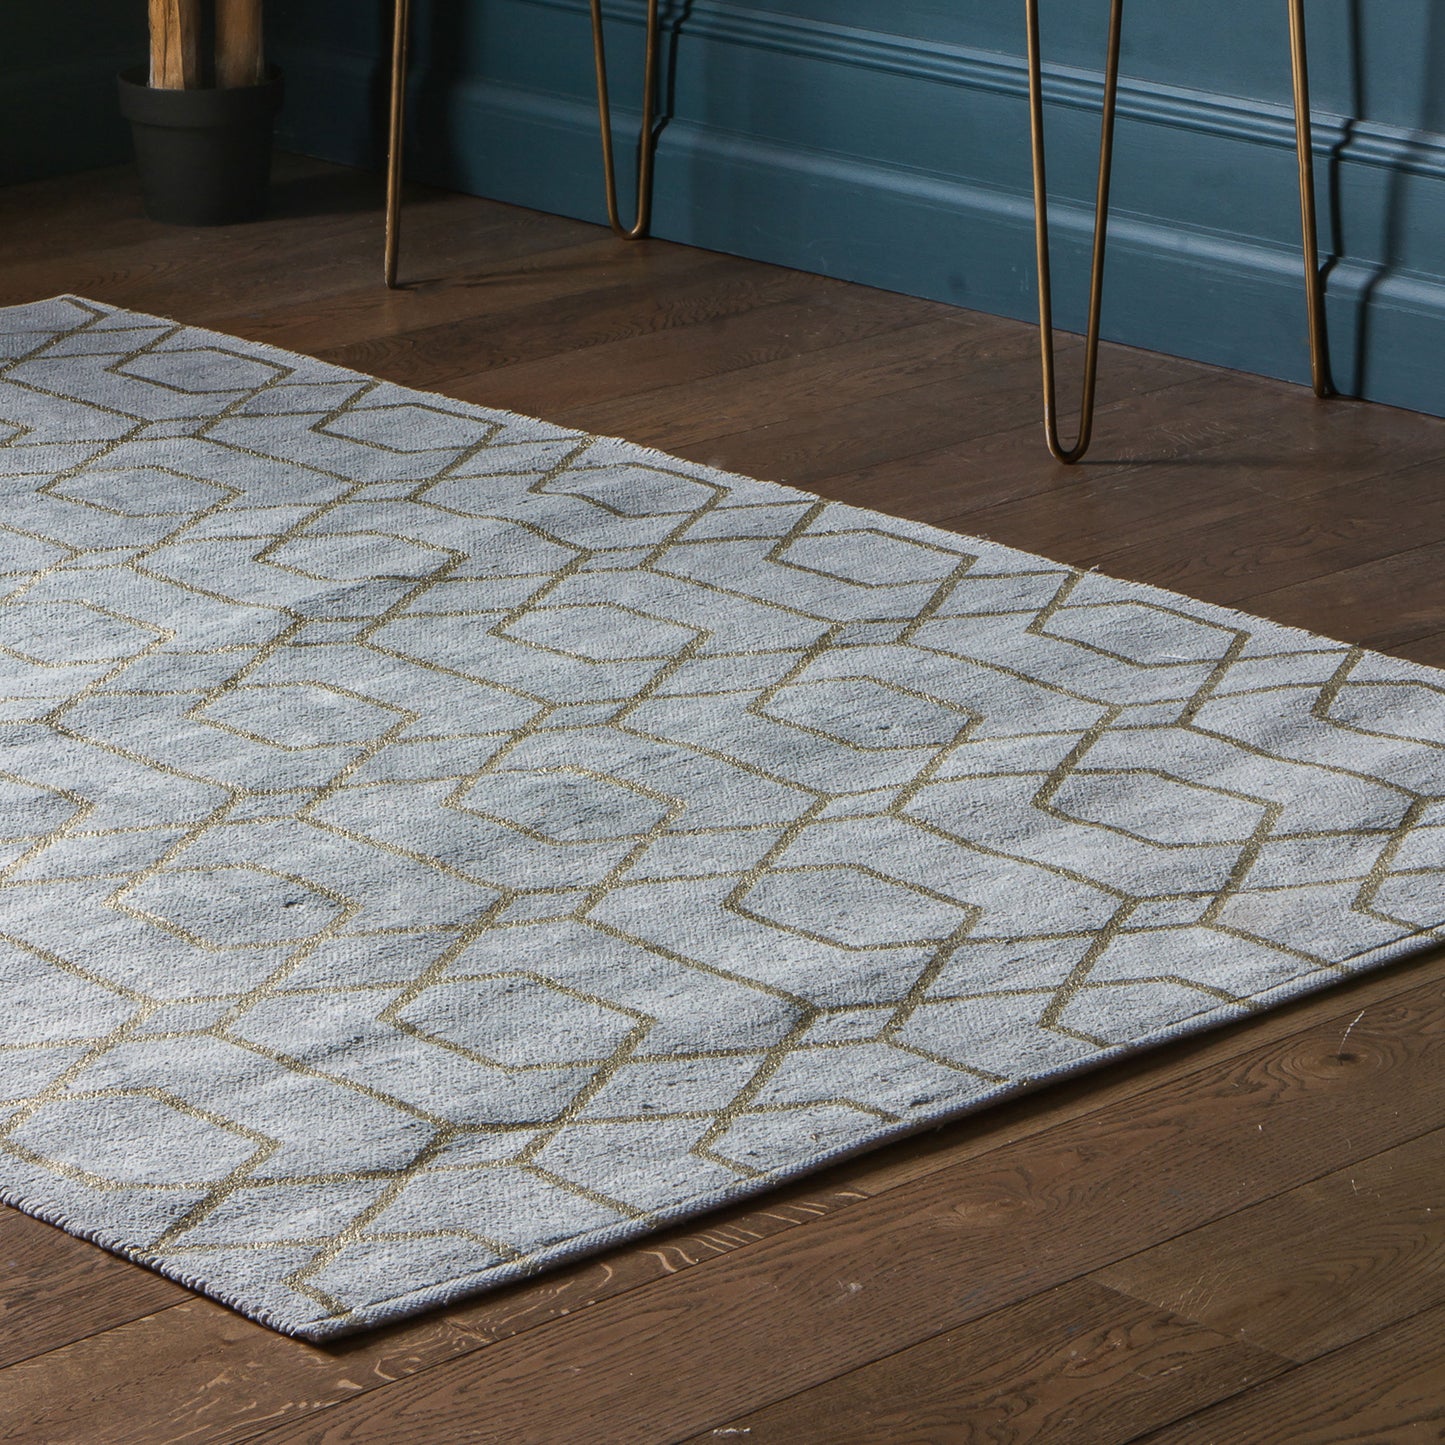 Load image into Gallery viewer, Interior decor, Home furniture: A Winchester Rug Grey 1600x2300mm by Kikiathome.co.uk beautifully enhances the wooden floor.
